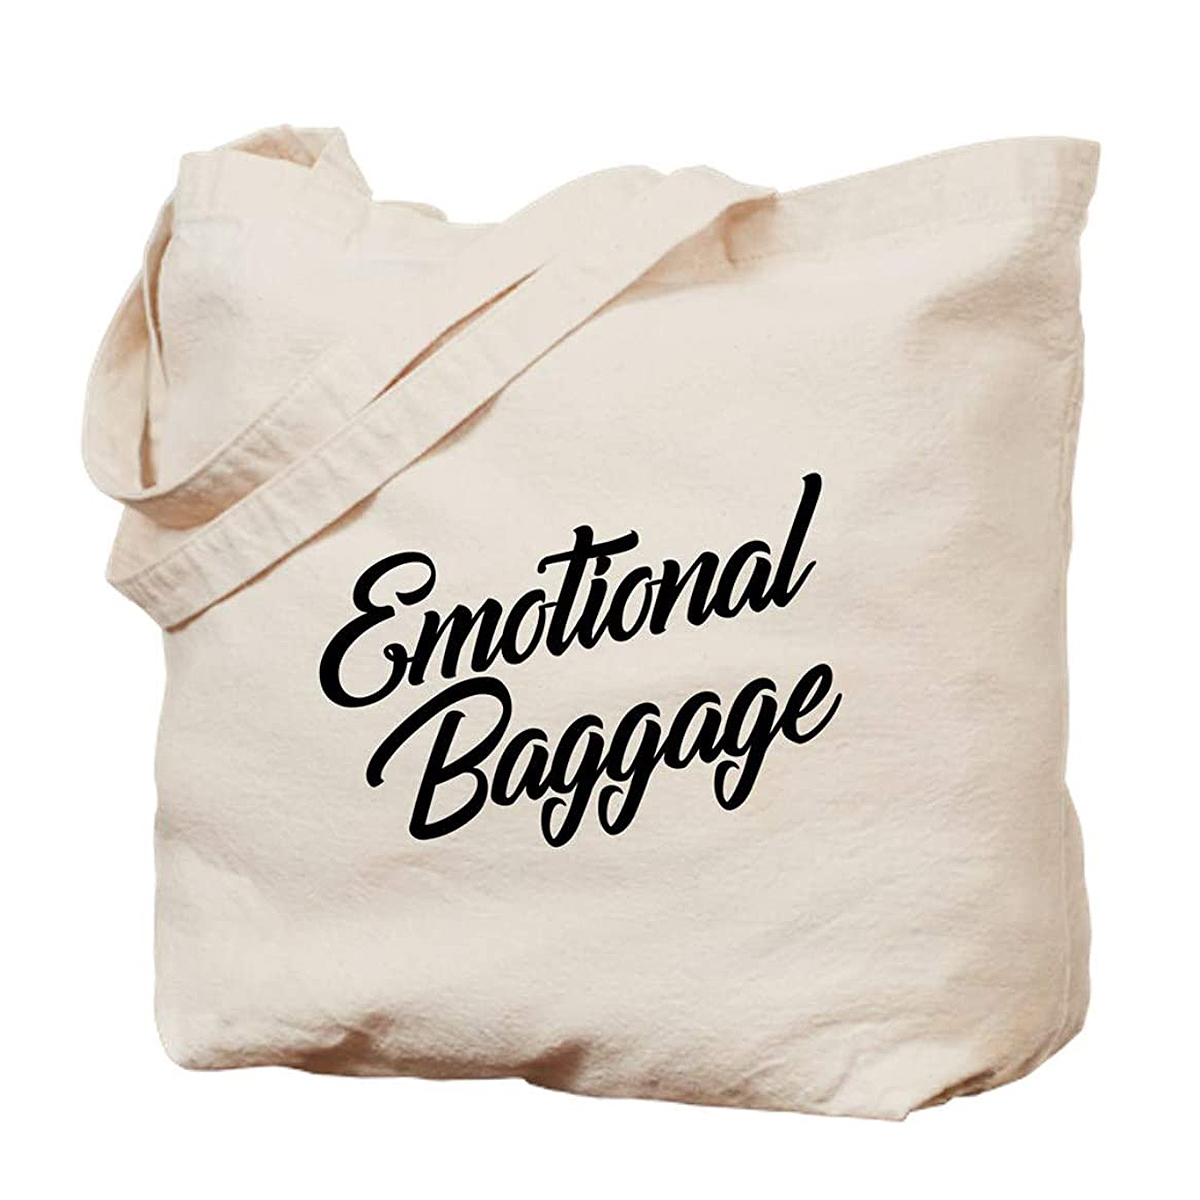 https://www.usmagazine.com/wp-content/uploads/2021/11/holiday-gifts-under-50-emotional-baggage-tote.jpg?quality=86&strip=all